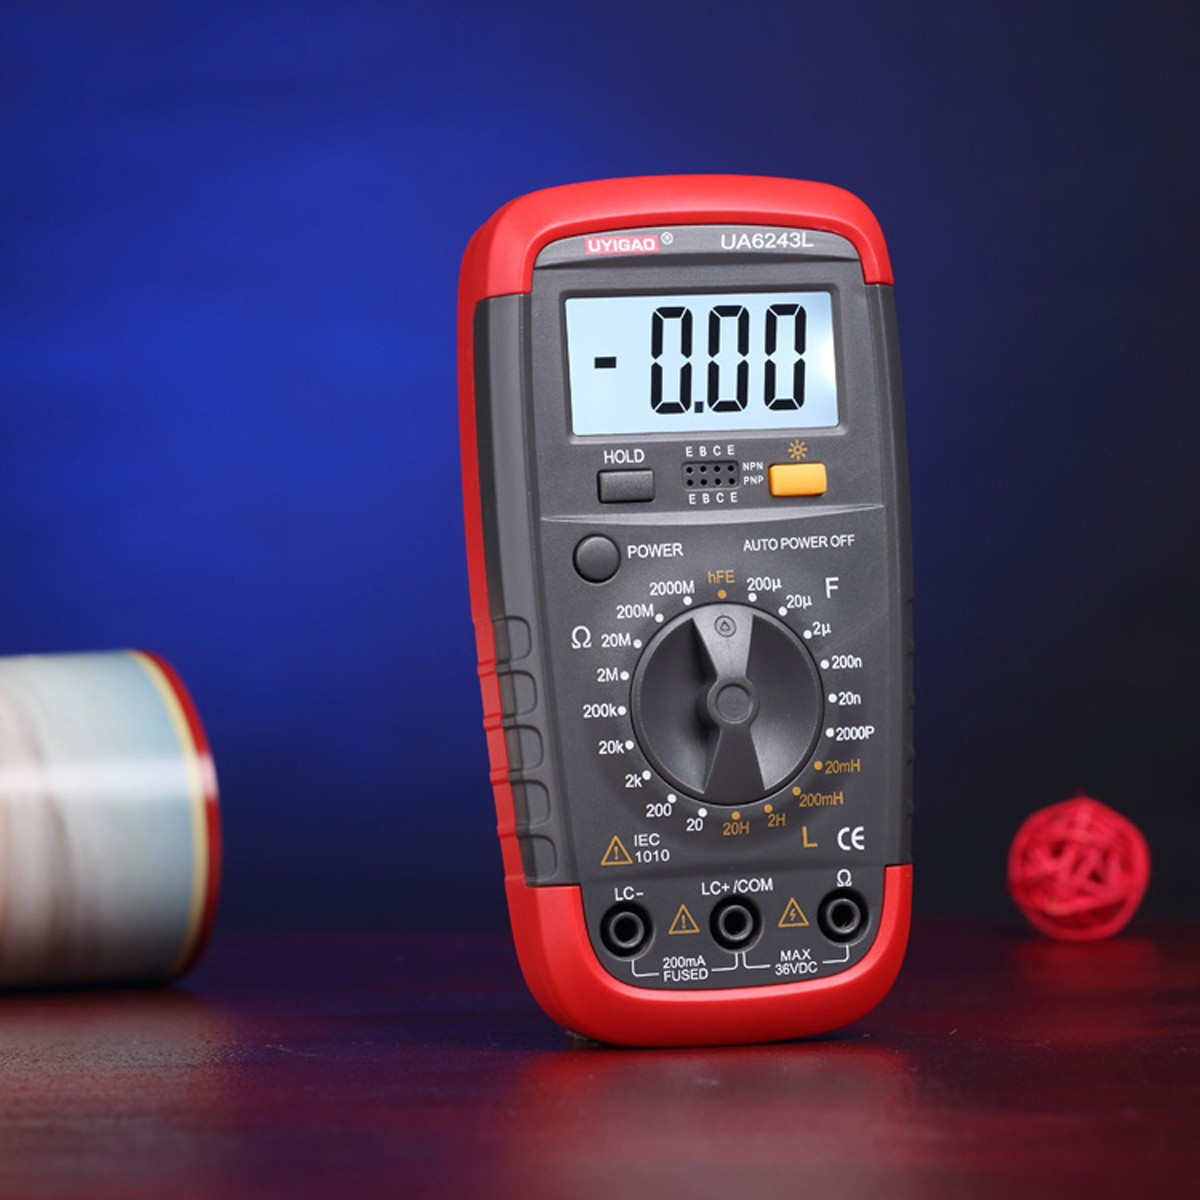 lcr meter, inductance meter, lcr tester, best lcr meter, handheld lcr meter, lcr multimeter, lcr measurement